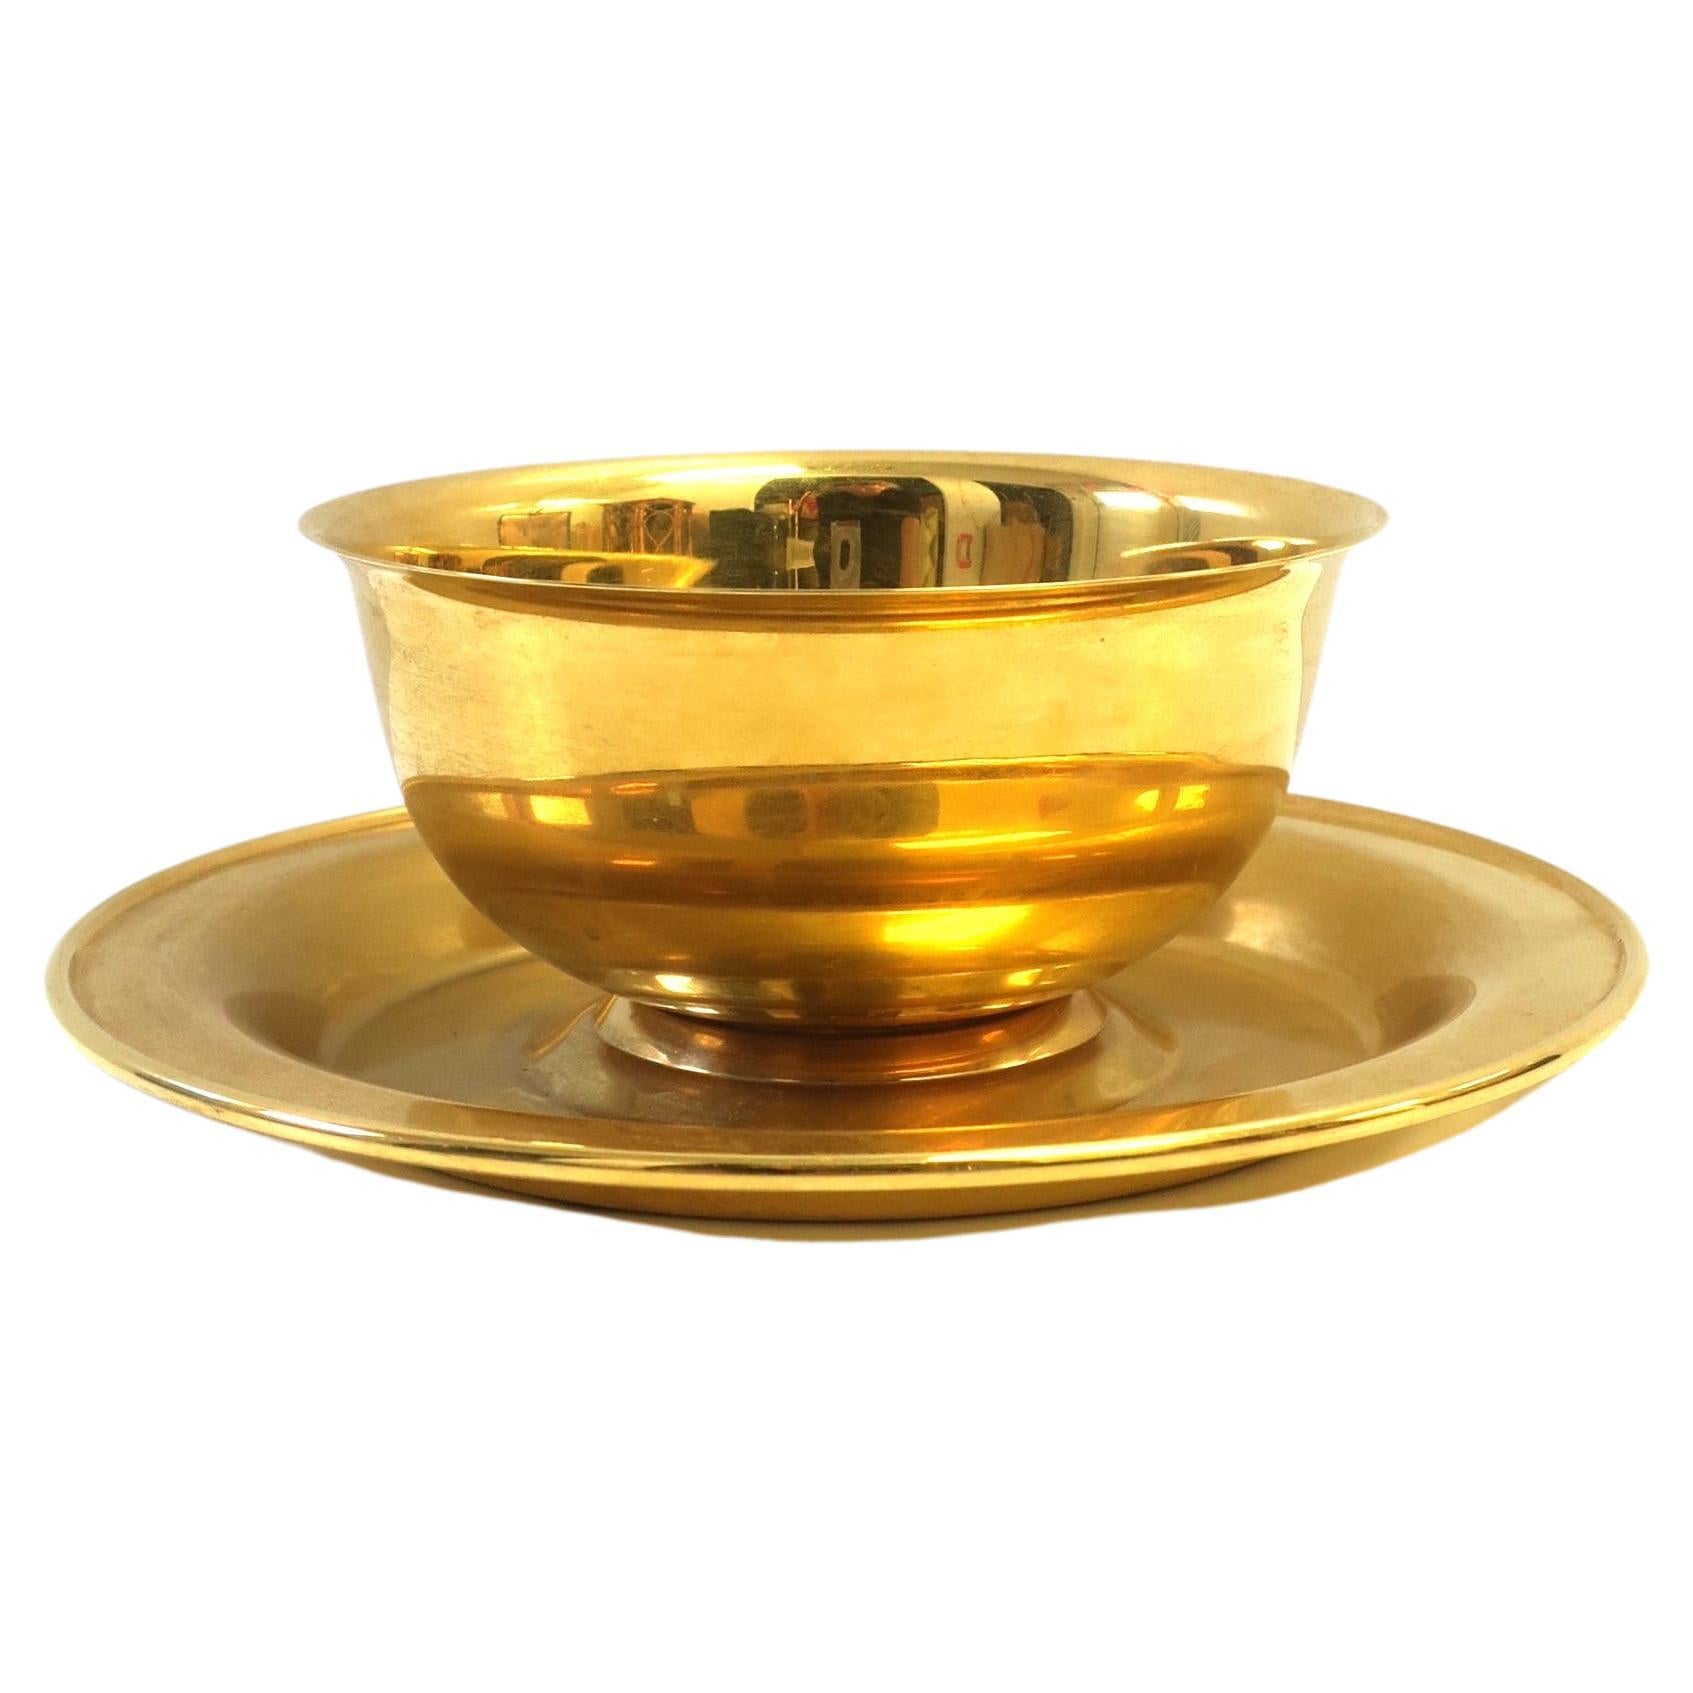 Gold Plated Revere Serving Bowl and Underplate Saucer For Sale